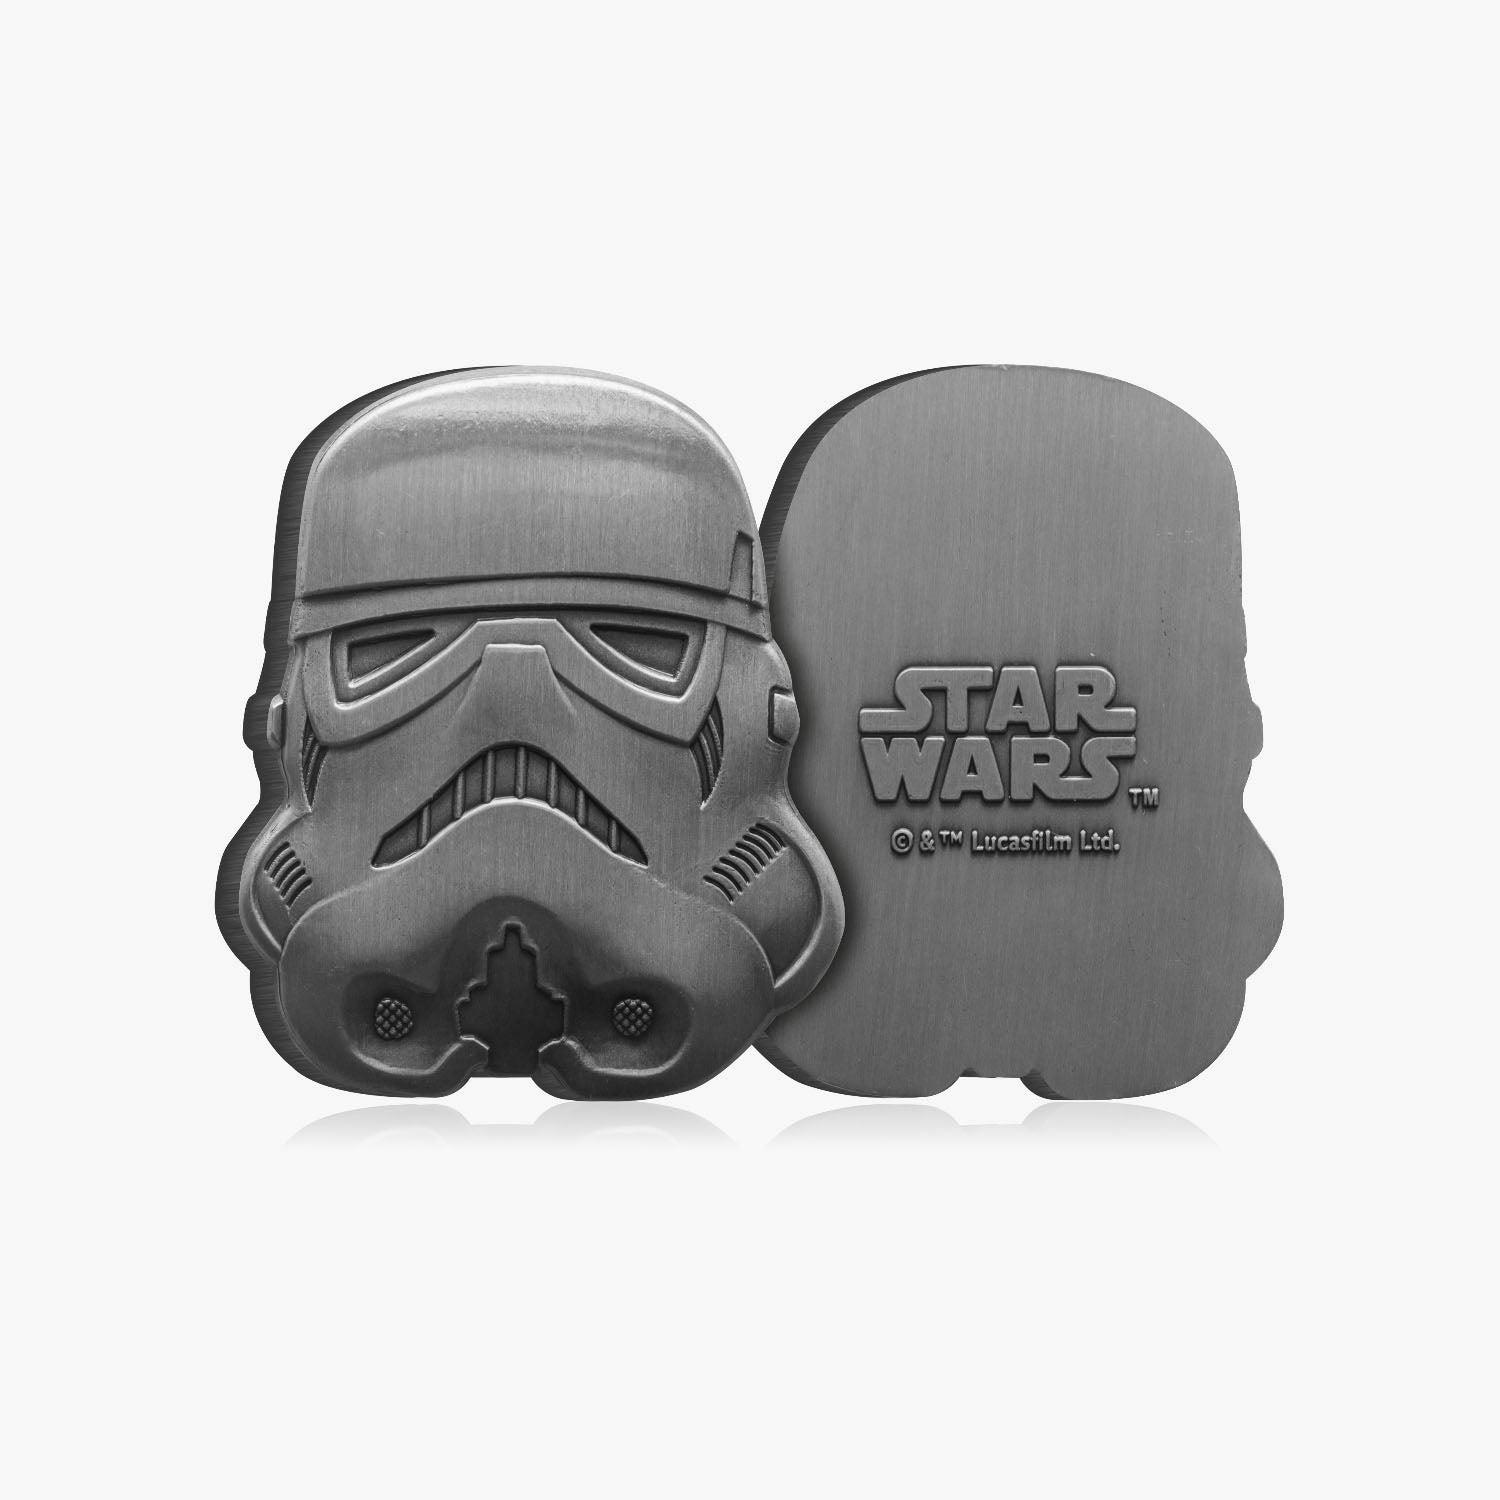 Official Star Wars Storm Trooper Shaped Commemorative